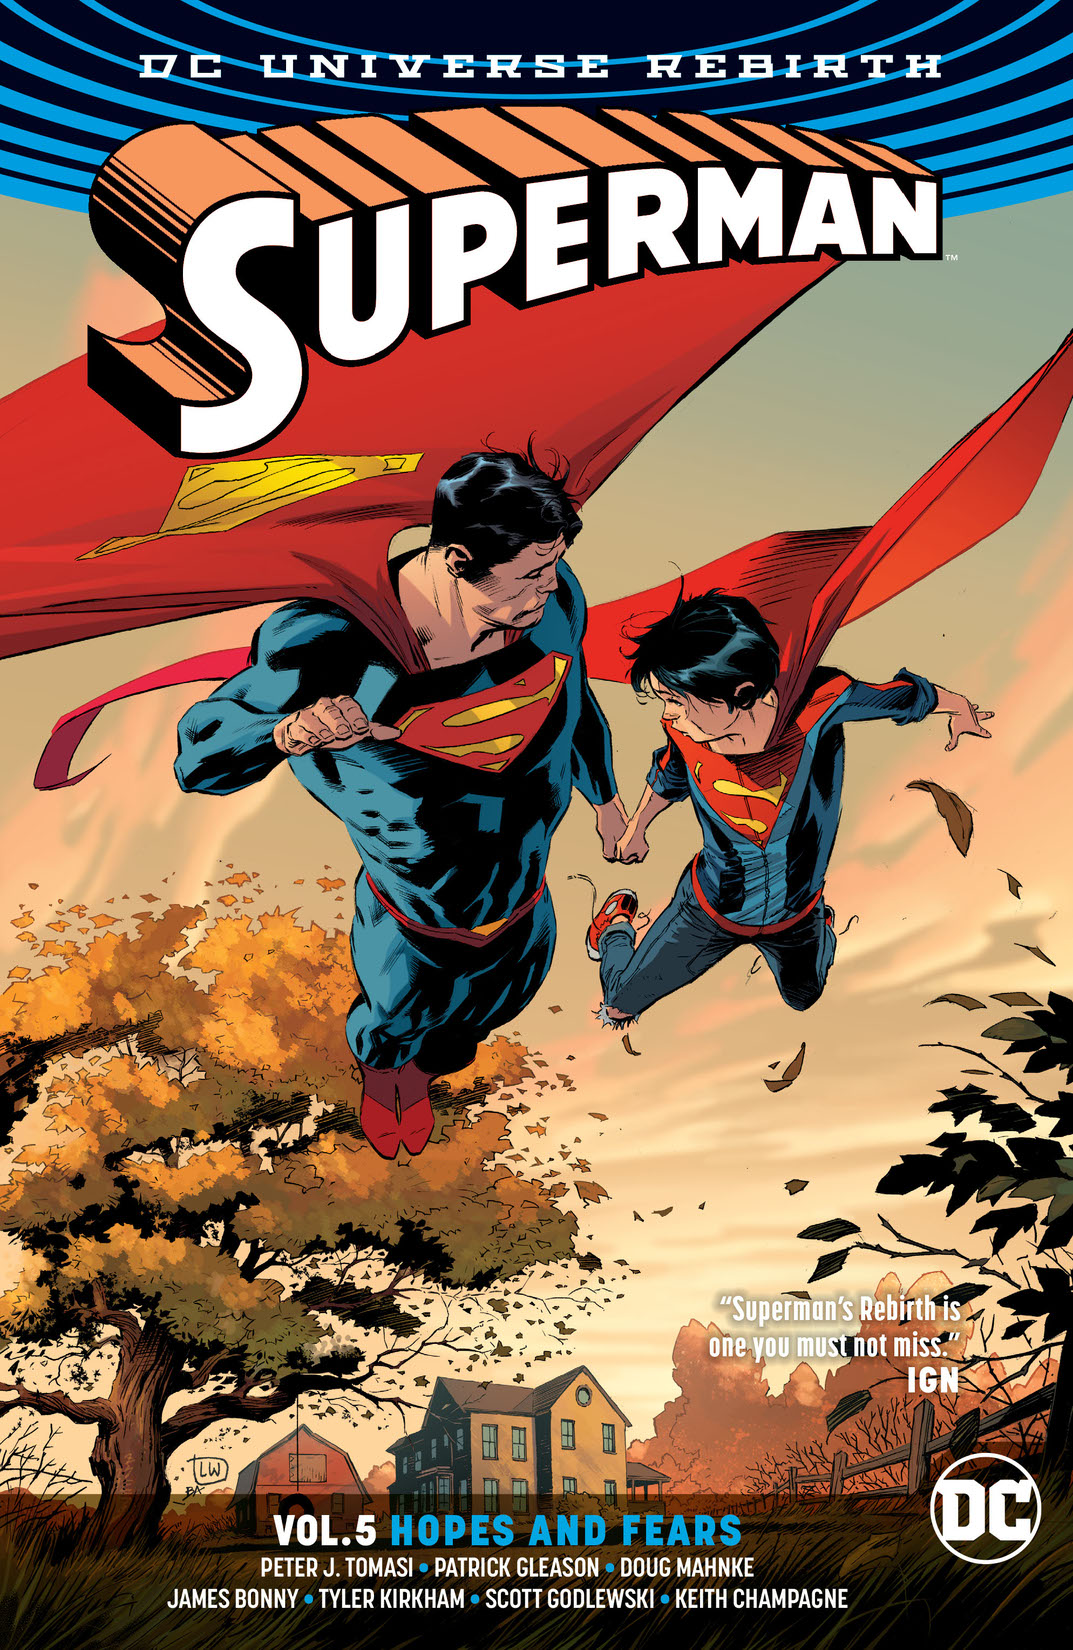 Superman Vol. 5: Hopes and Fears (Rebirth) preview images